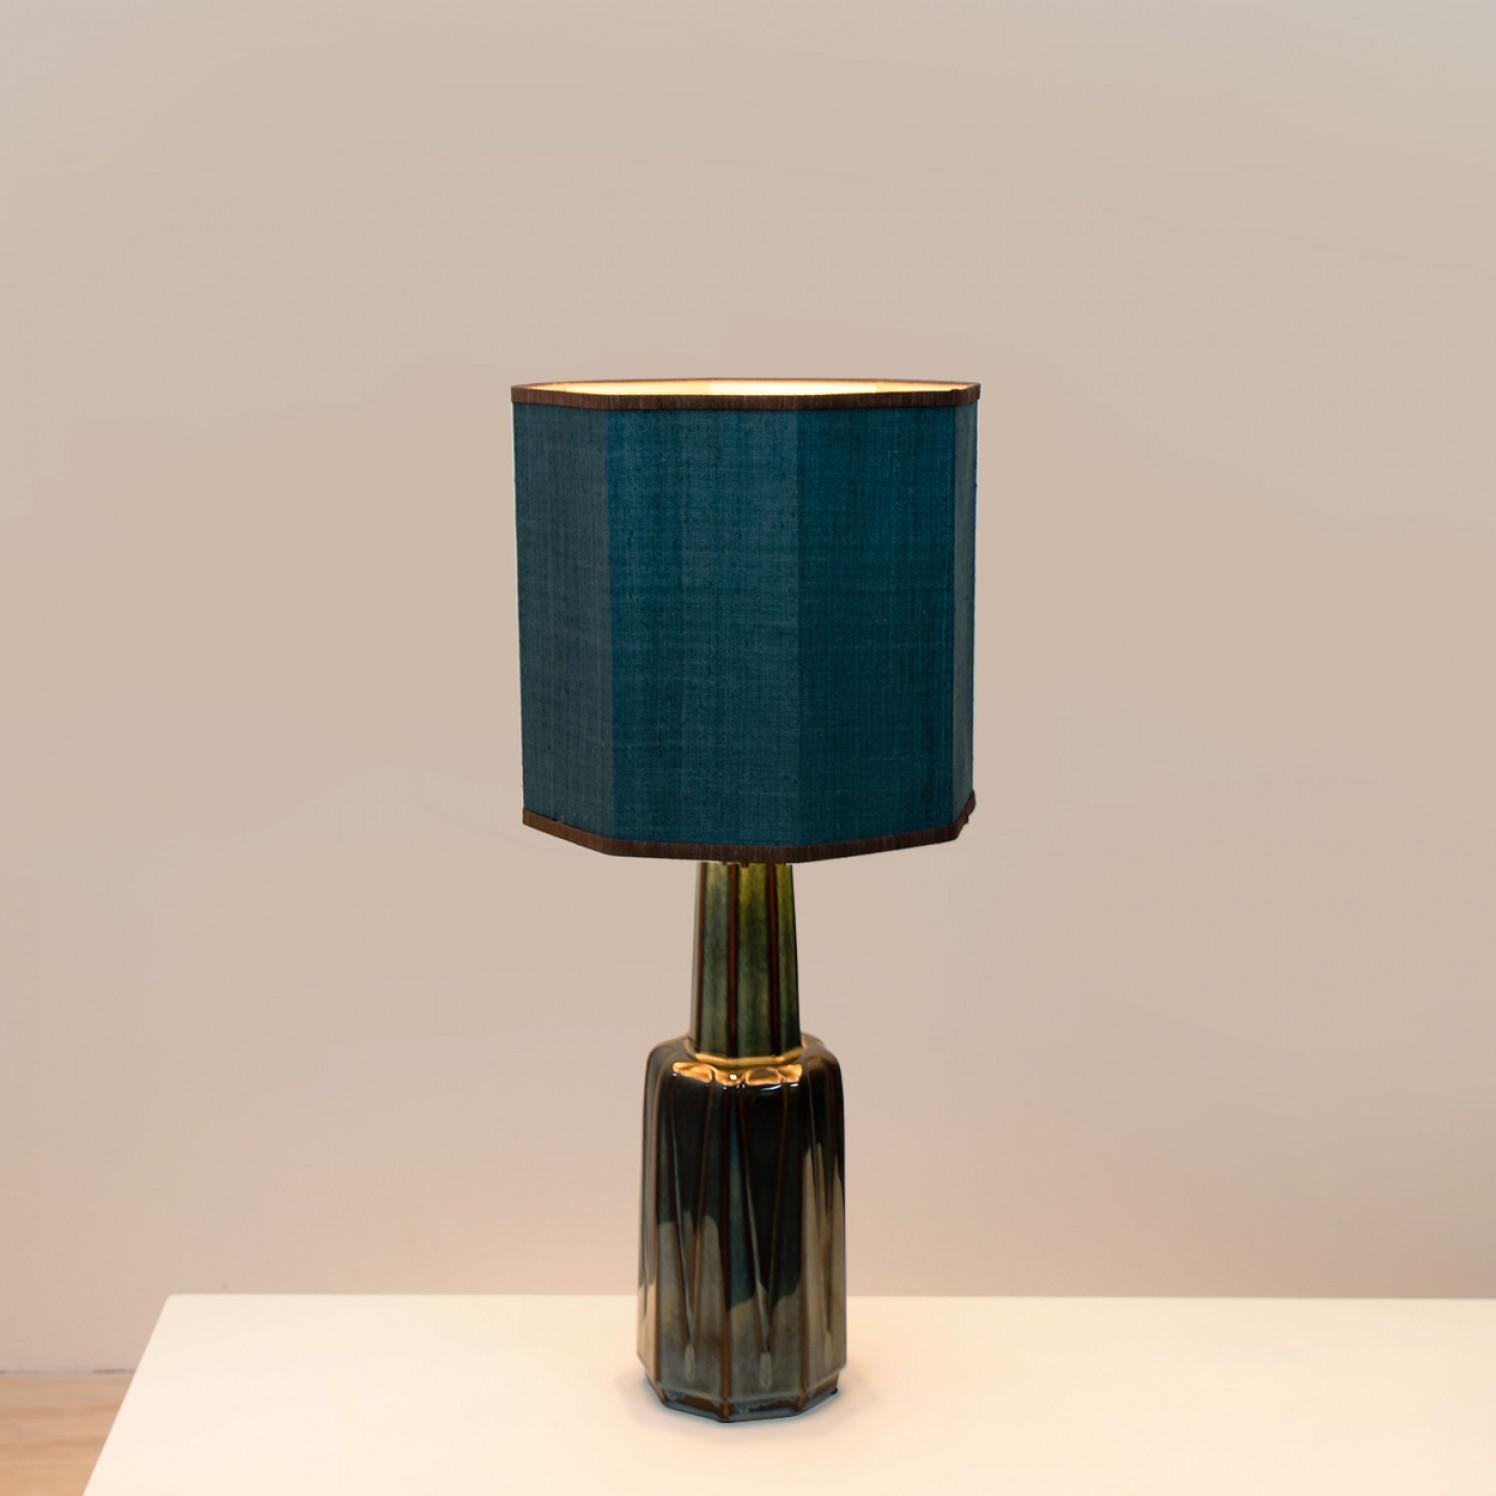 1 of the 2 Large Soholm Lamp with New Blue Silk Custom Made Lampshade Houben, 19 2